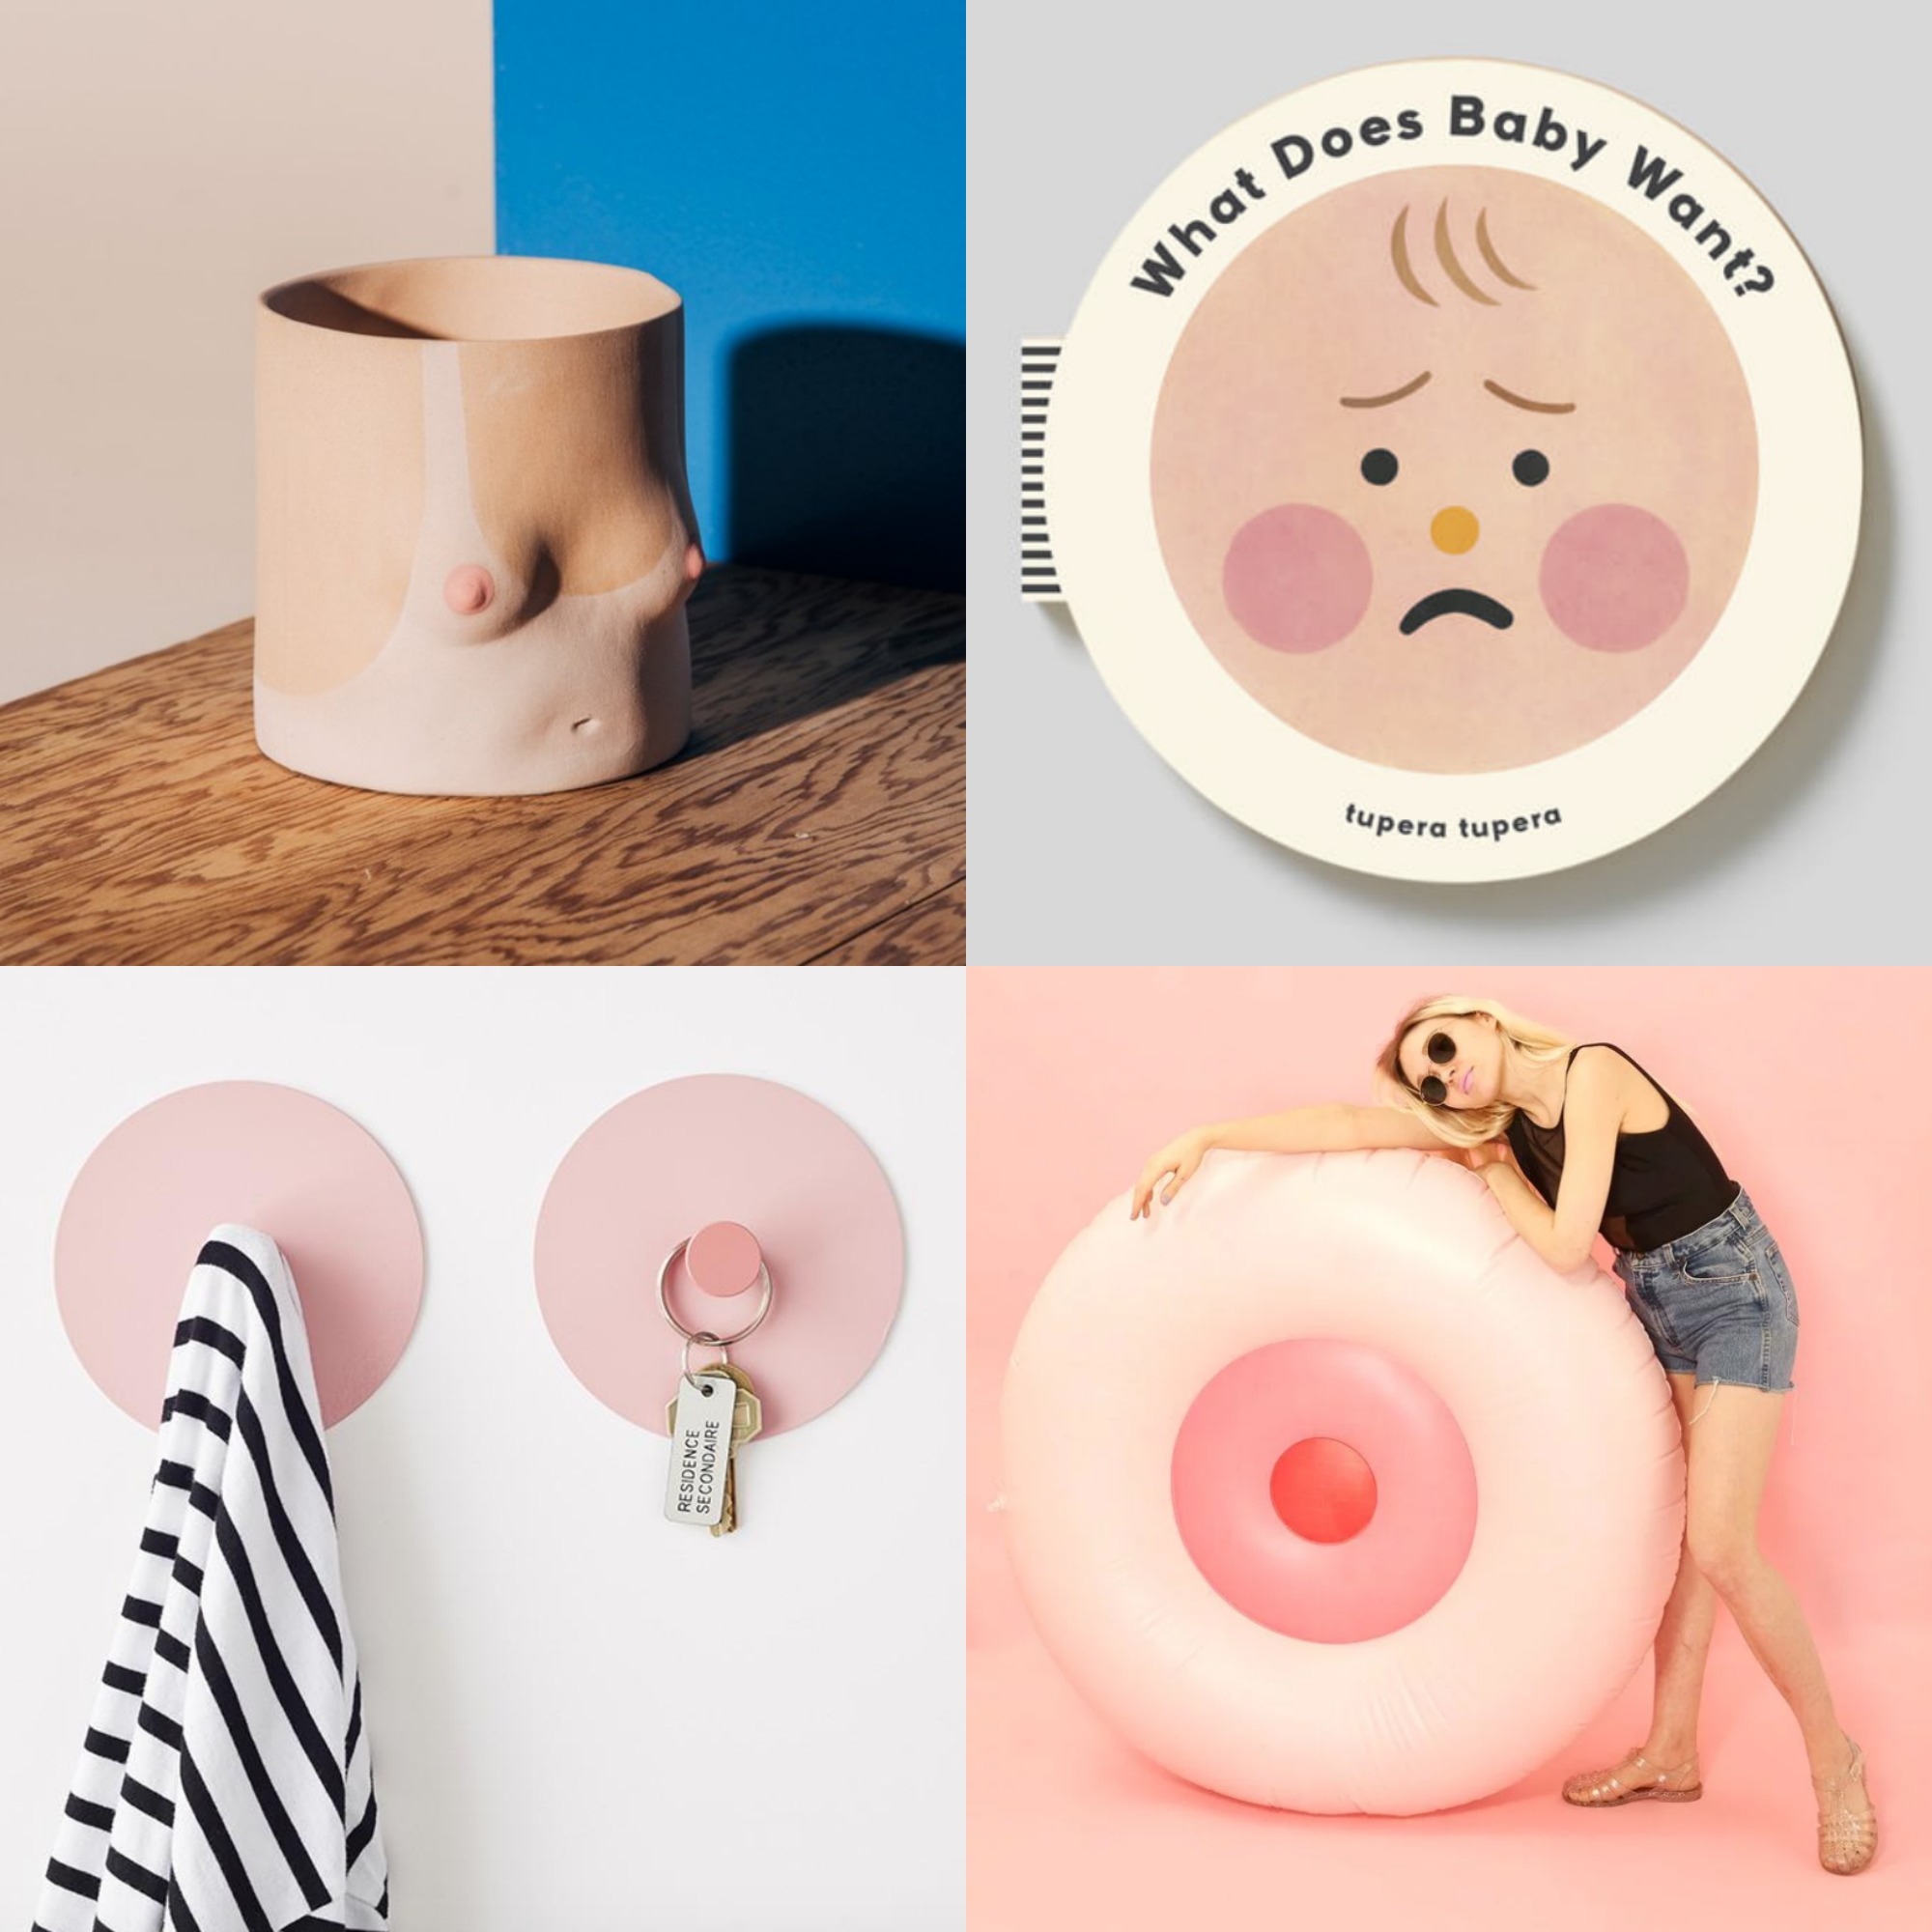 10 Clever Products for People with Boobs